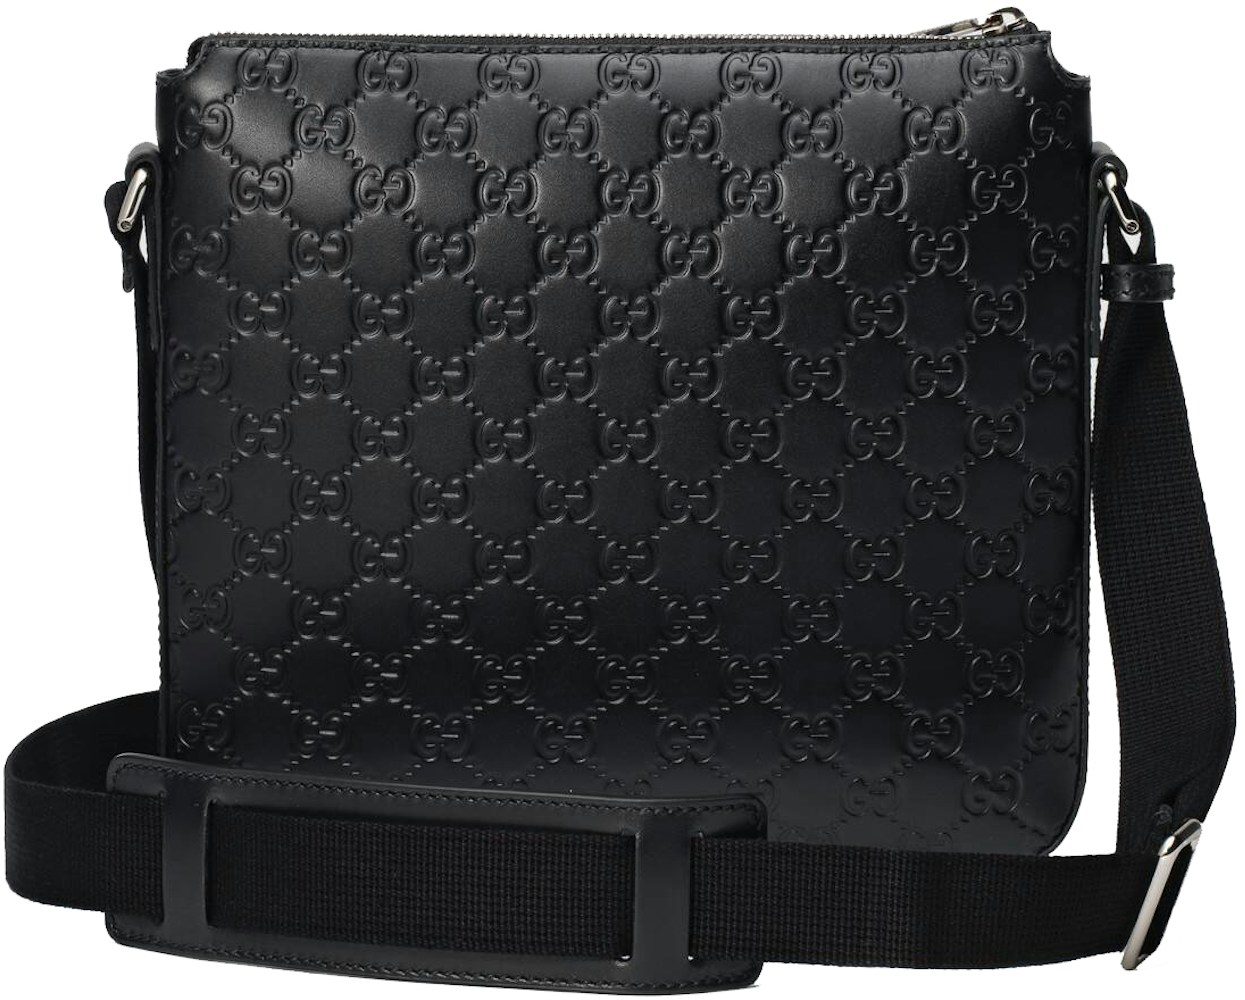 Gucci Signature Messenger Black in Leather with Silver-tone